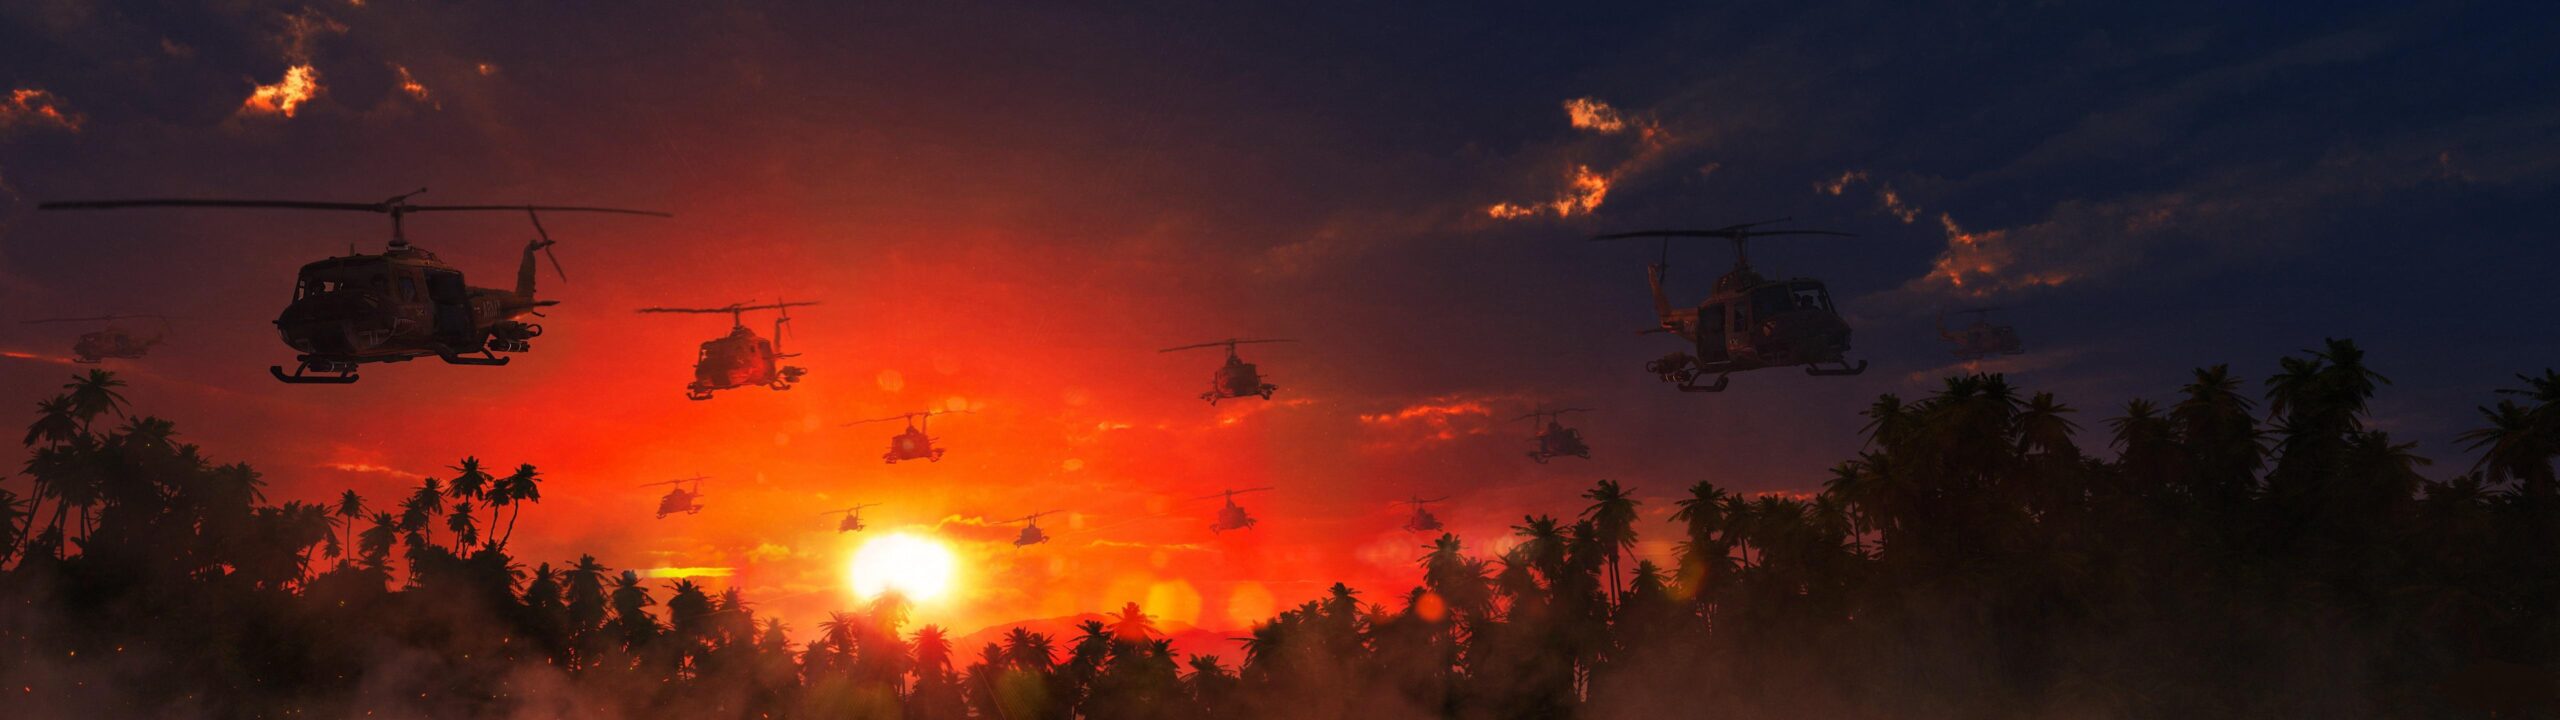 Wallpaper Helicopters US Vietnam War Sunrises and sunsets